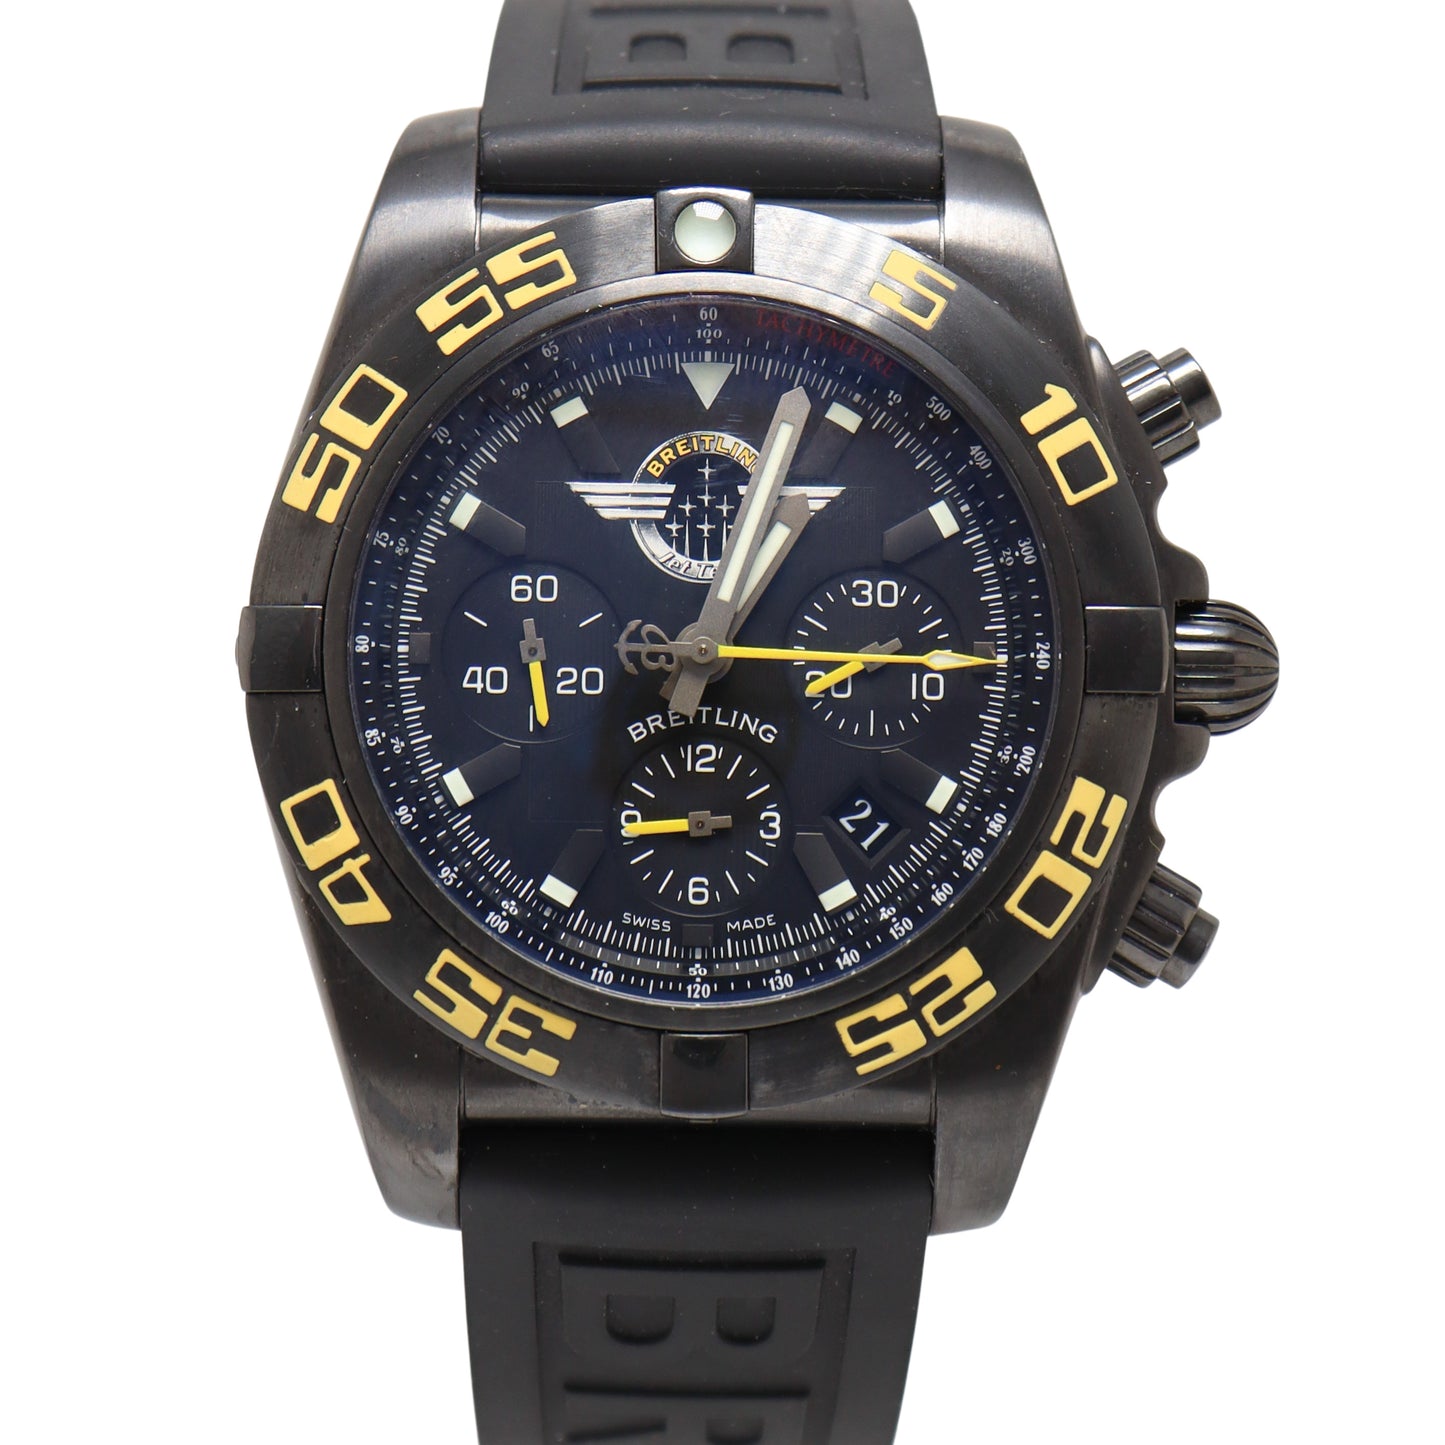 Breitling Chronomat Jet Team "American Tour Edition" Black PVD/DLC 44mm Black Chronograph Dial Watch Reference# MB0110 - Happy Jewelers Fine Jewelry Lifetime Warranty